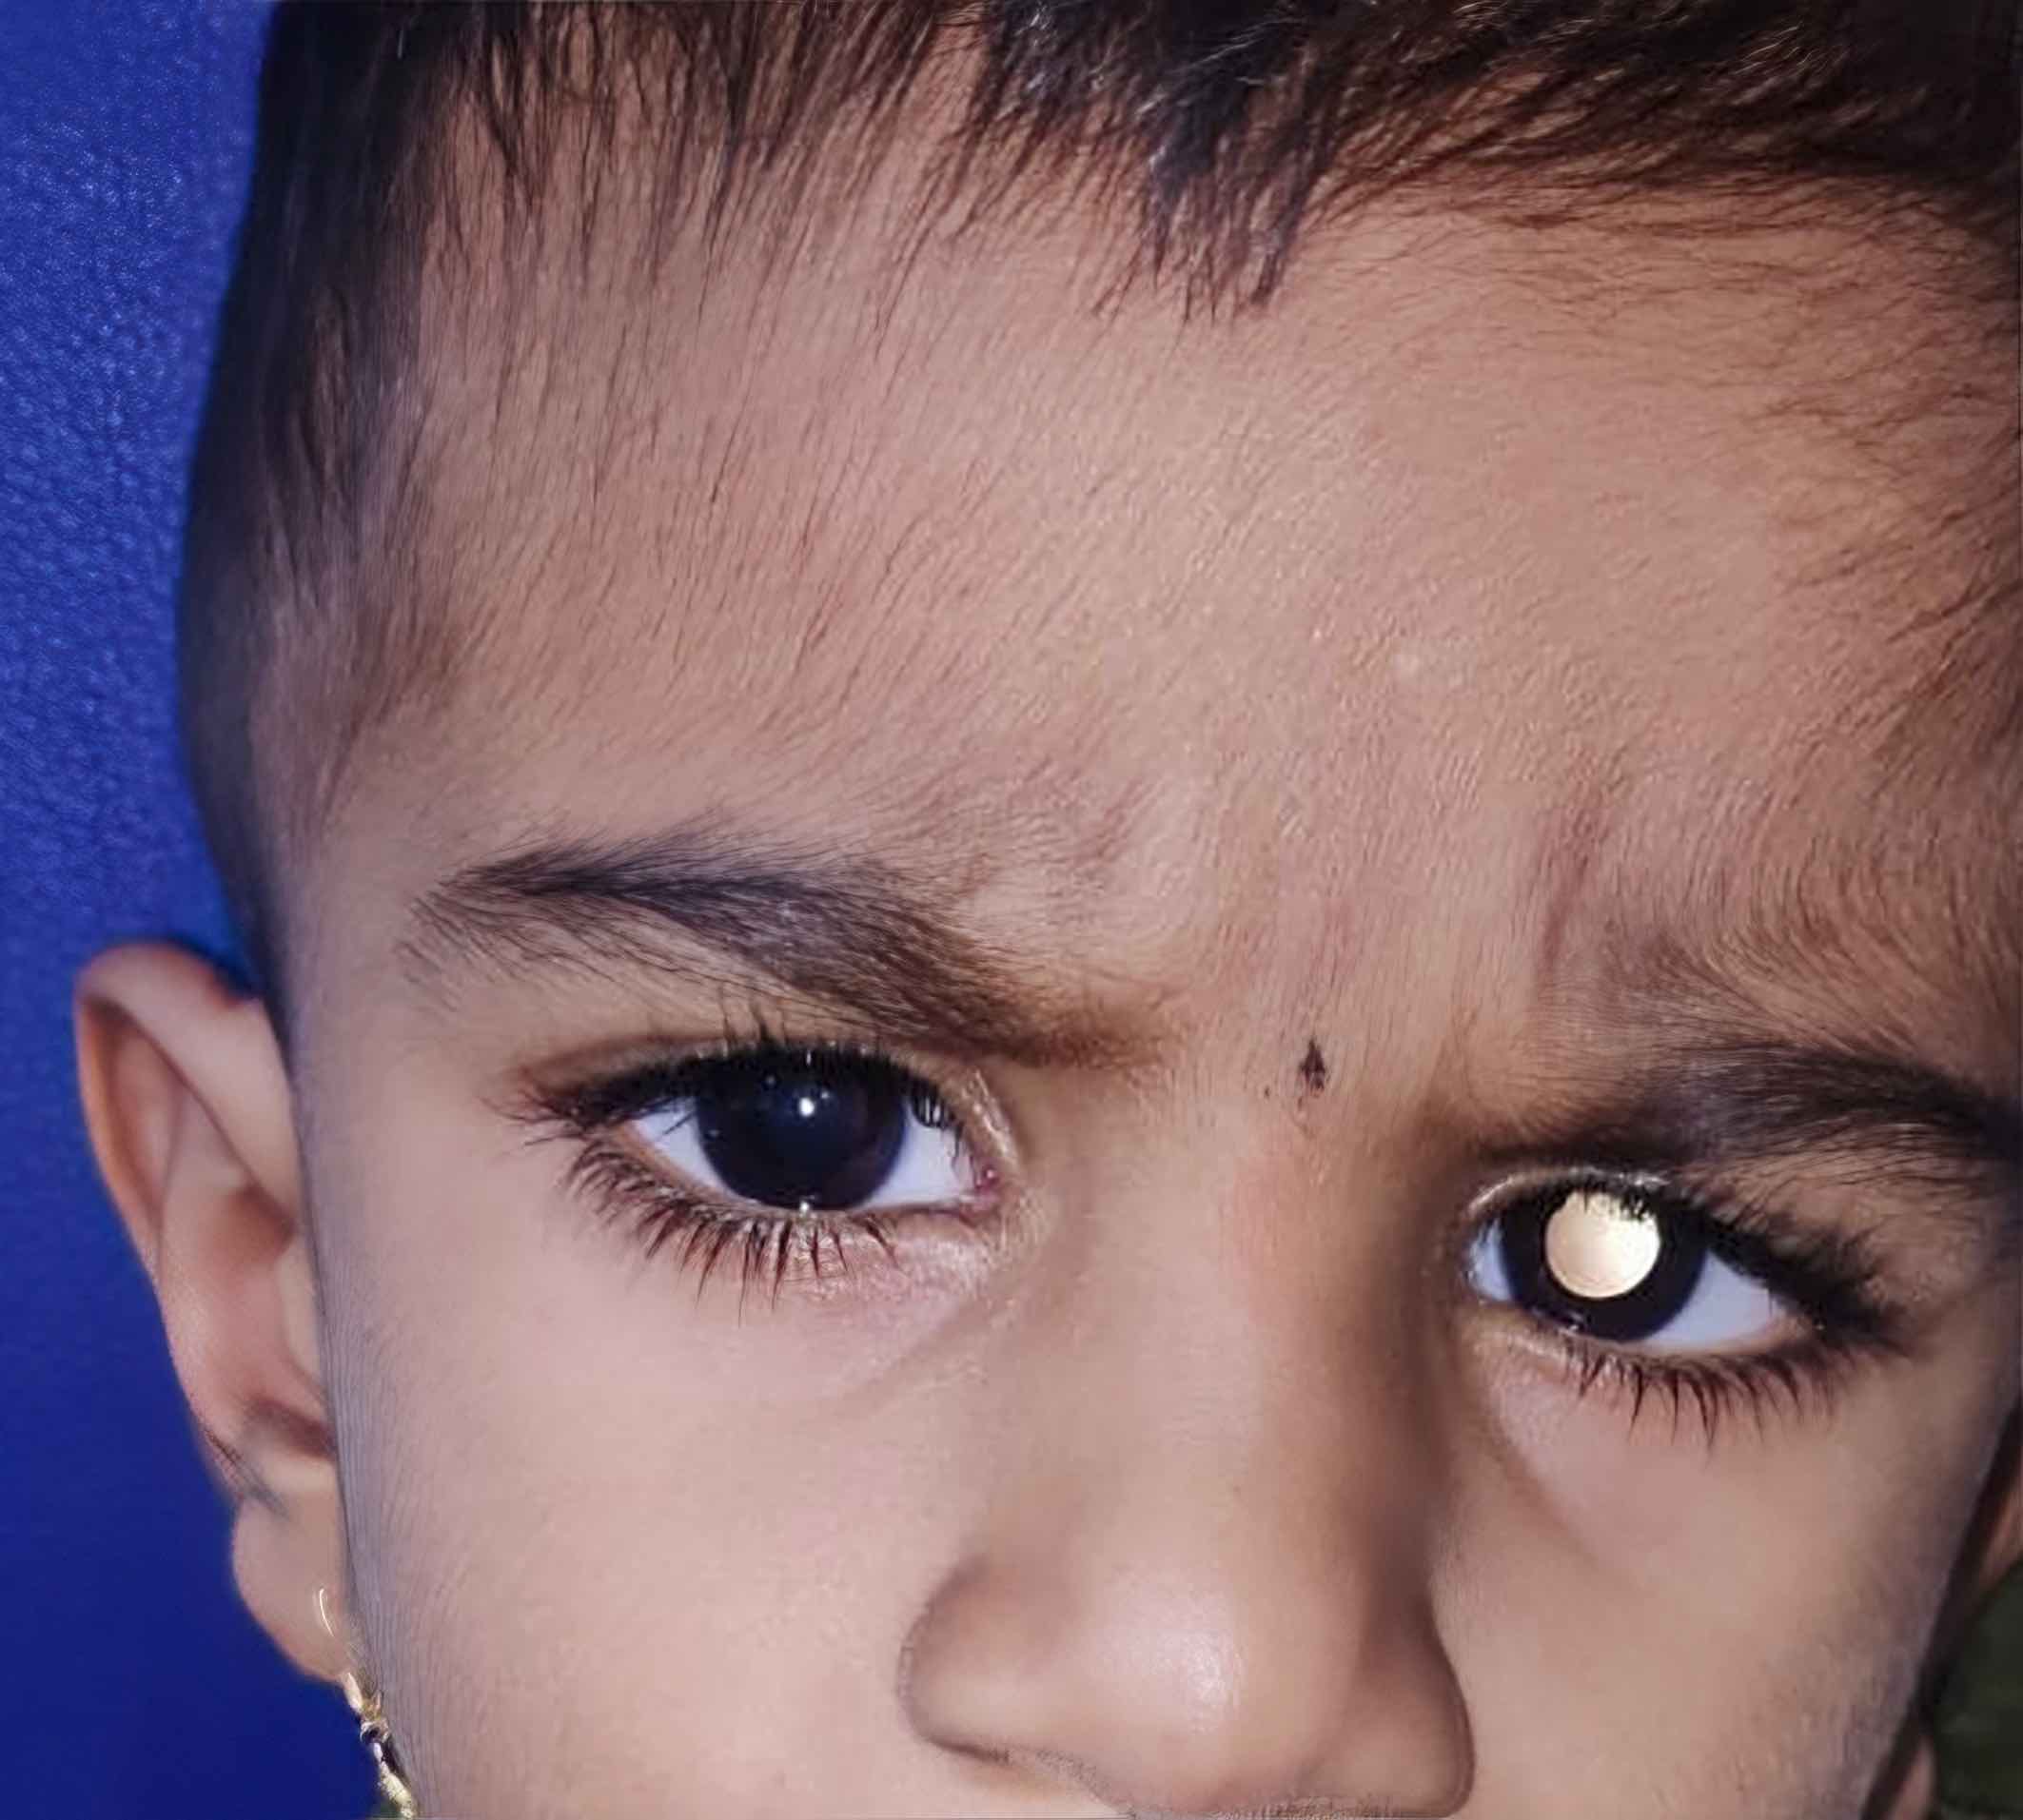 A child with retinoblastoma in the left eye, visible when using a torch light or ophthalmoscope to elicit the red reflex. INDIA (Photo: © Shilpa Sonarkhan CC BY-NC-SA 4.0)